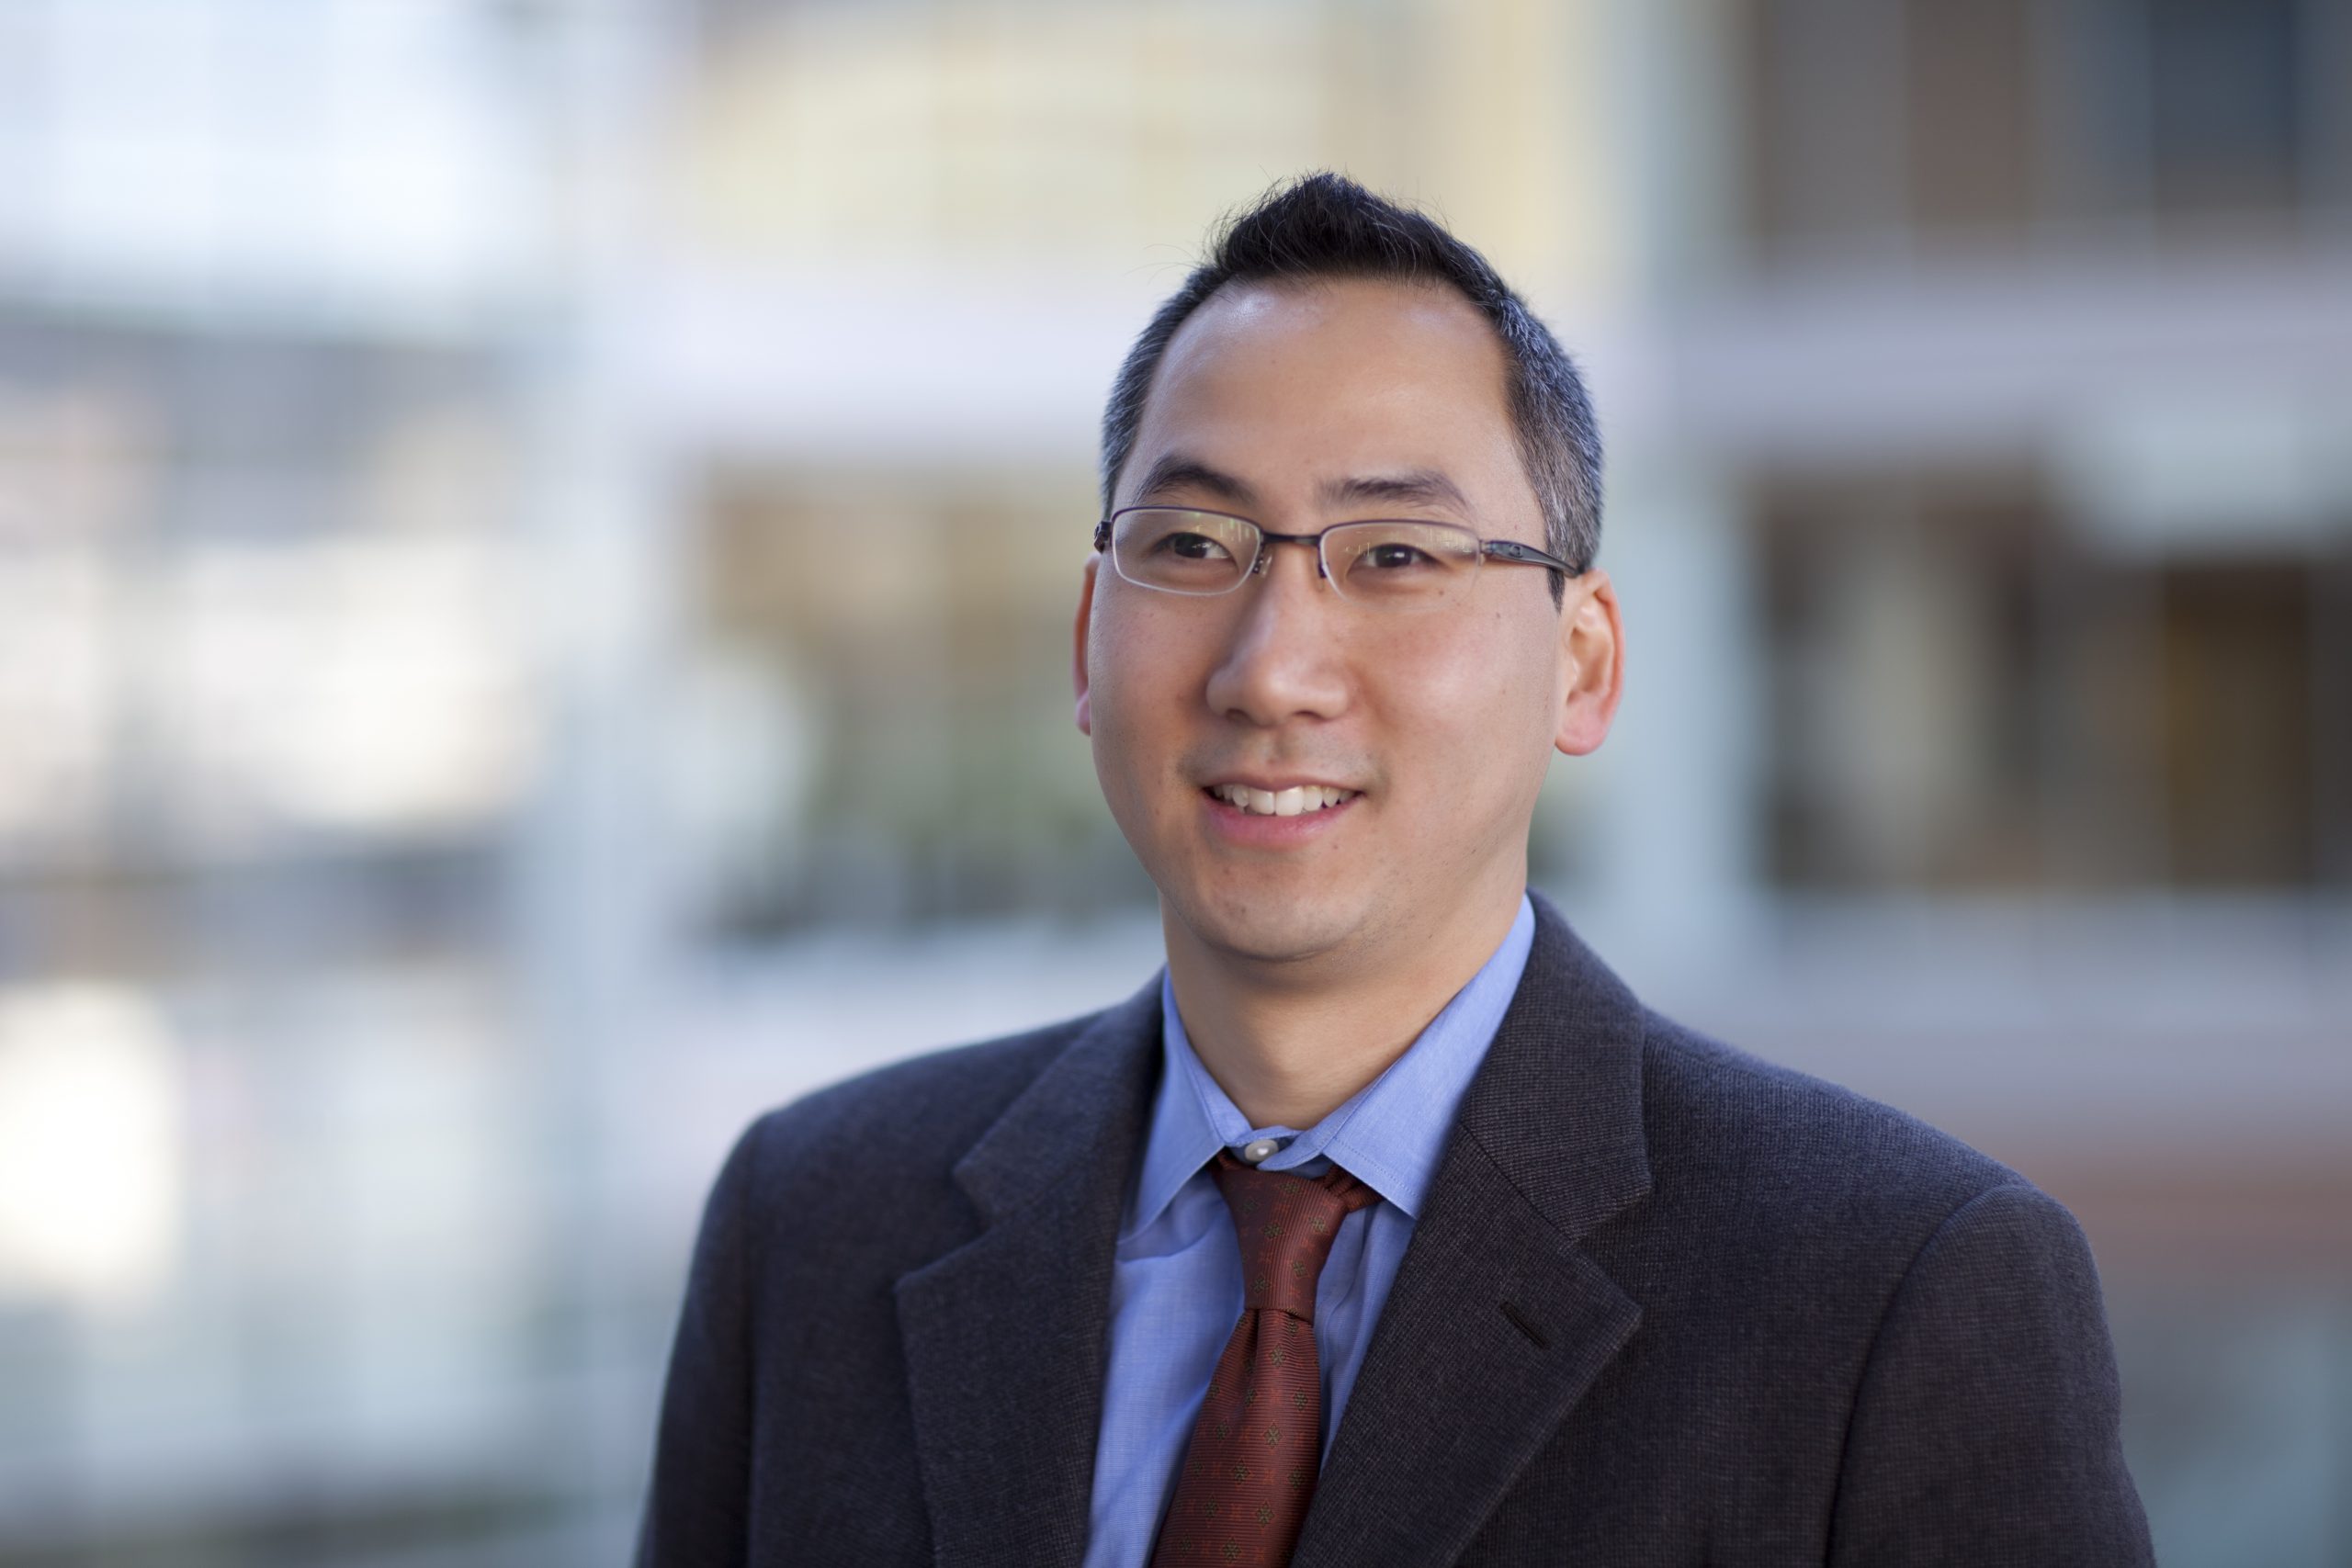 William Y. Kim, MD, is a UNC Lineberger member and associate professor in the UNC School of Medicine.